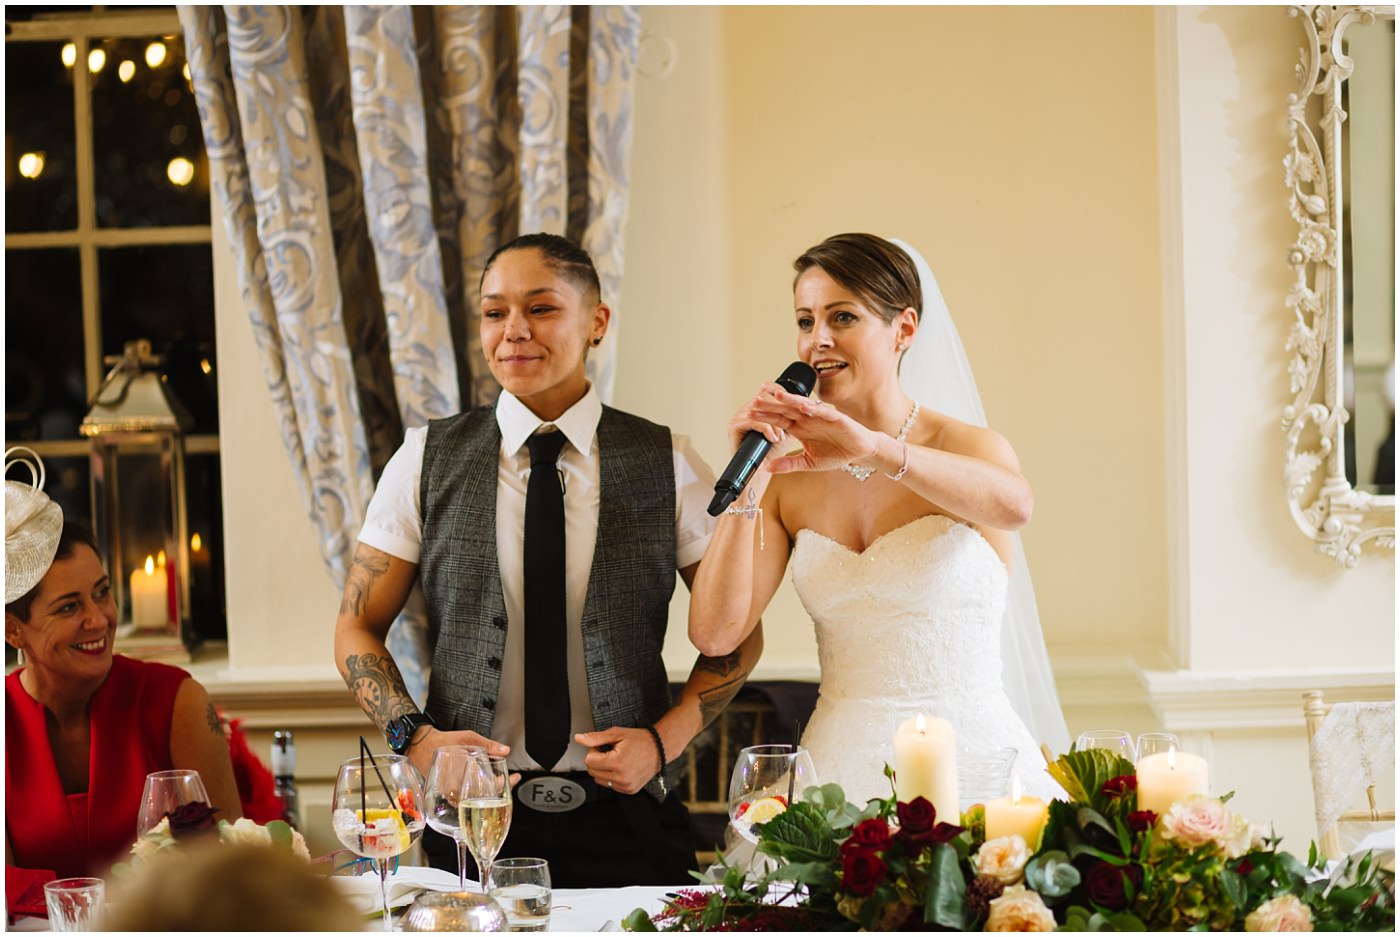 Brides speak and say thank you to family and guests